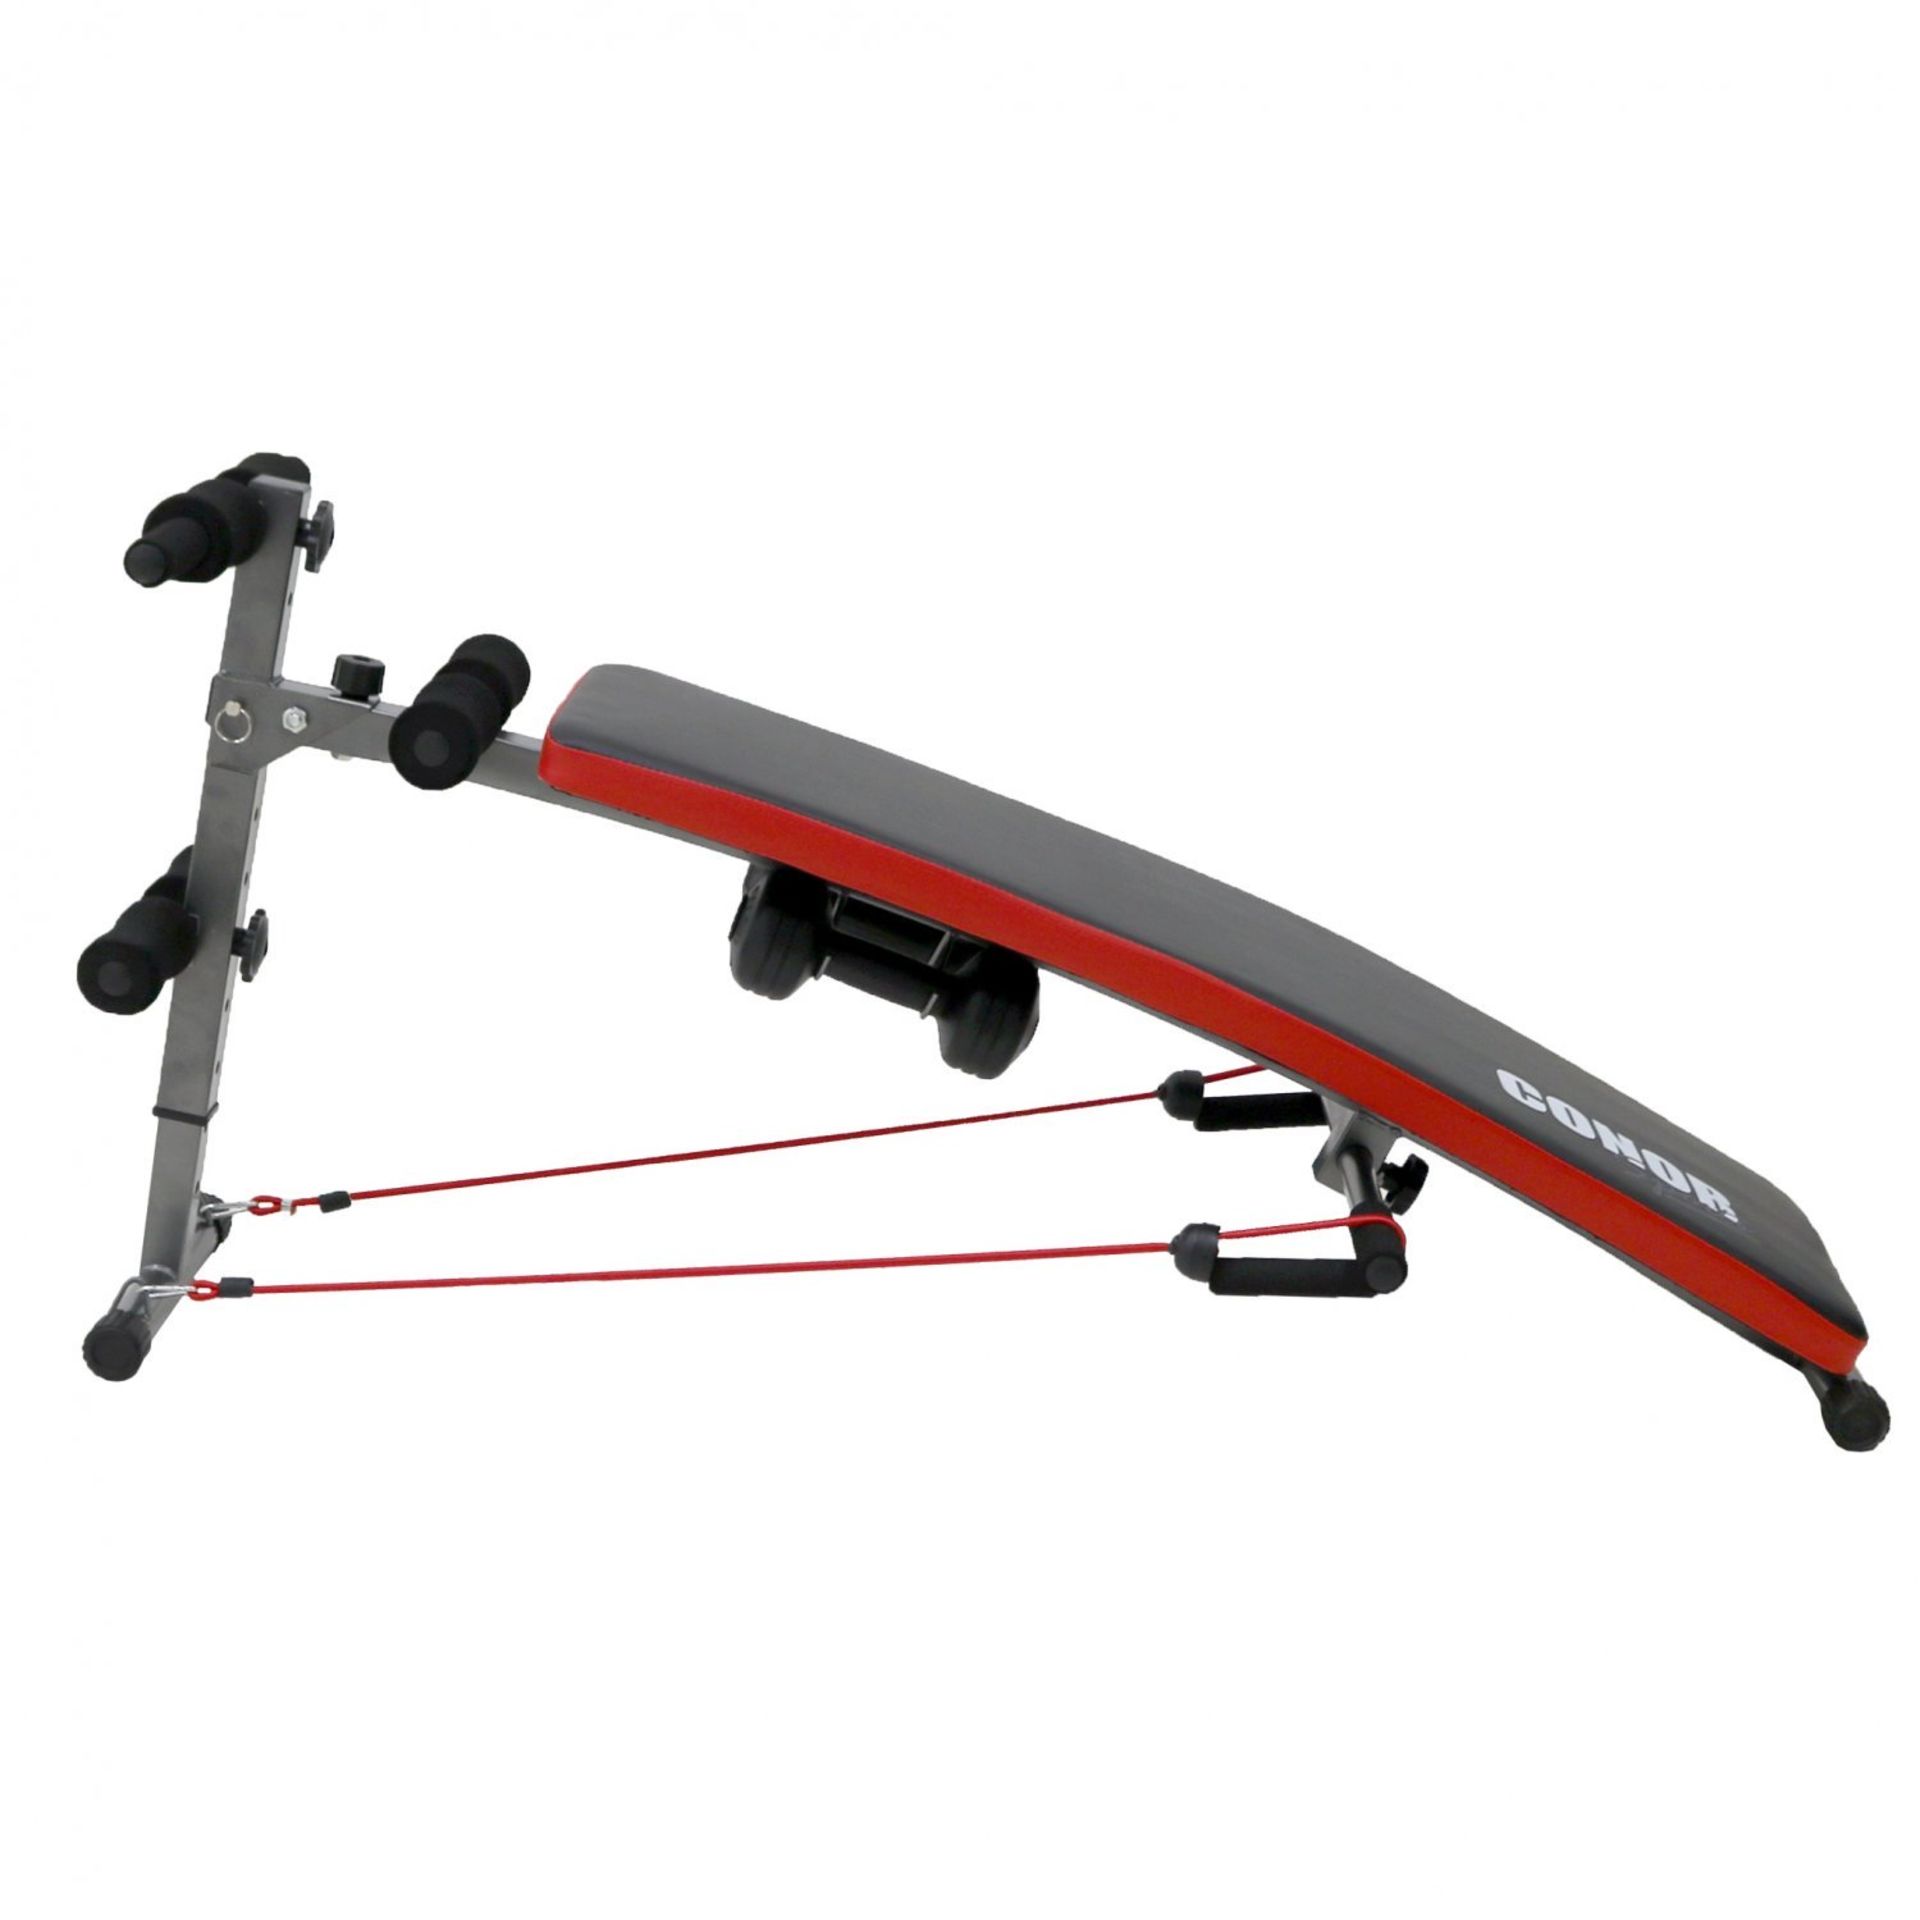 (RU39) Sports Heavy Duty Sit-Up Bench WIth Power Ropes And Dumbbells The Sports sit up ... - Image 2 of 2